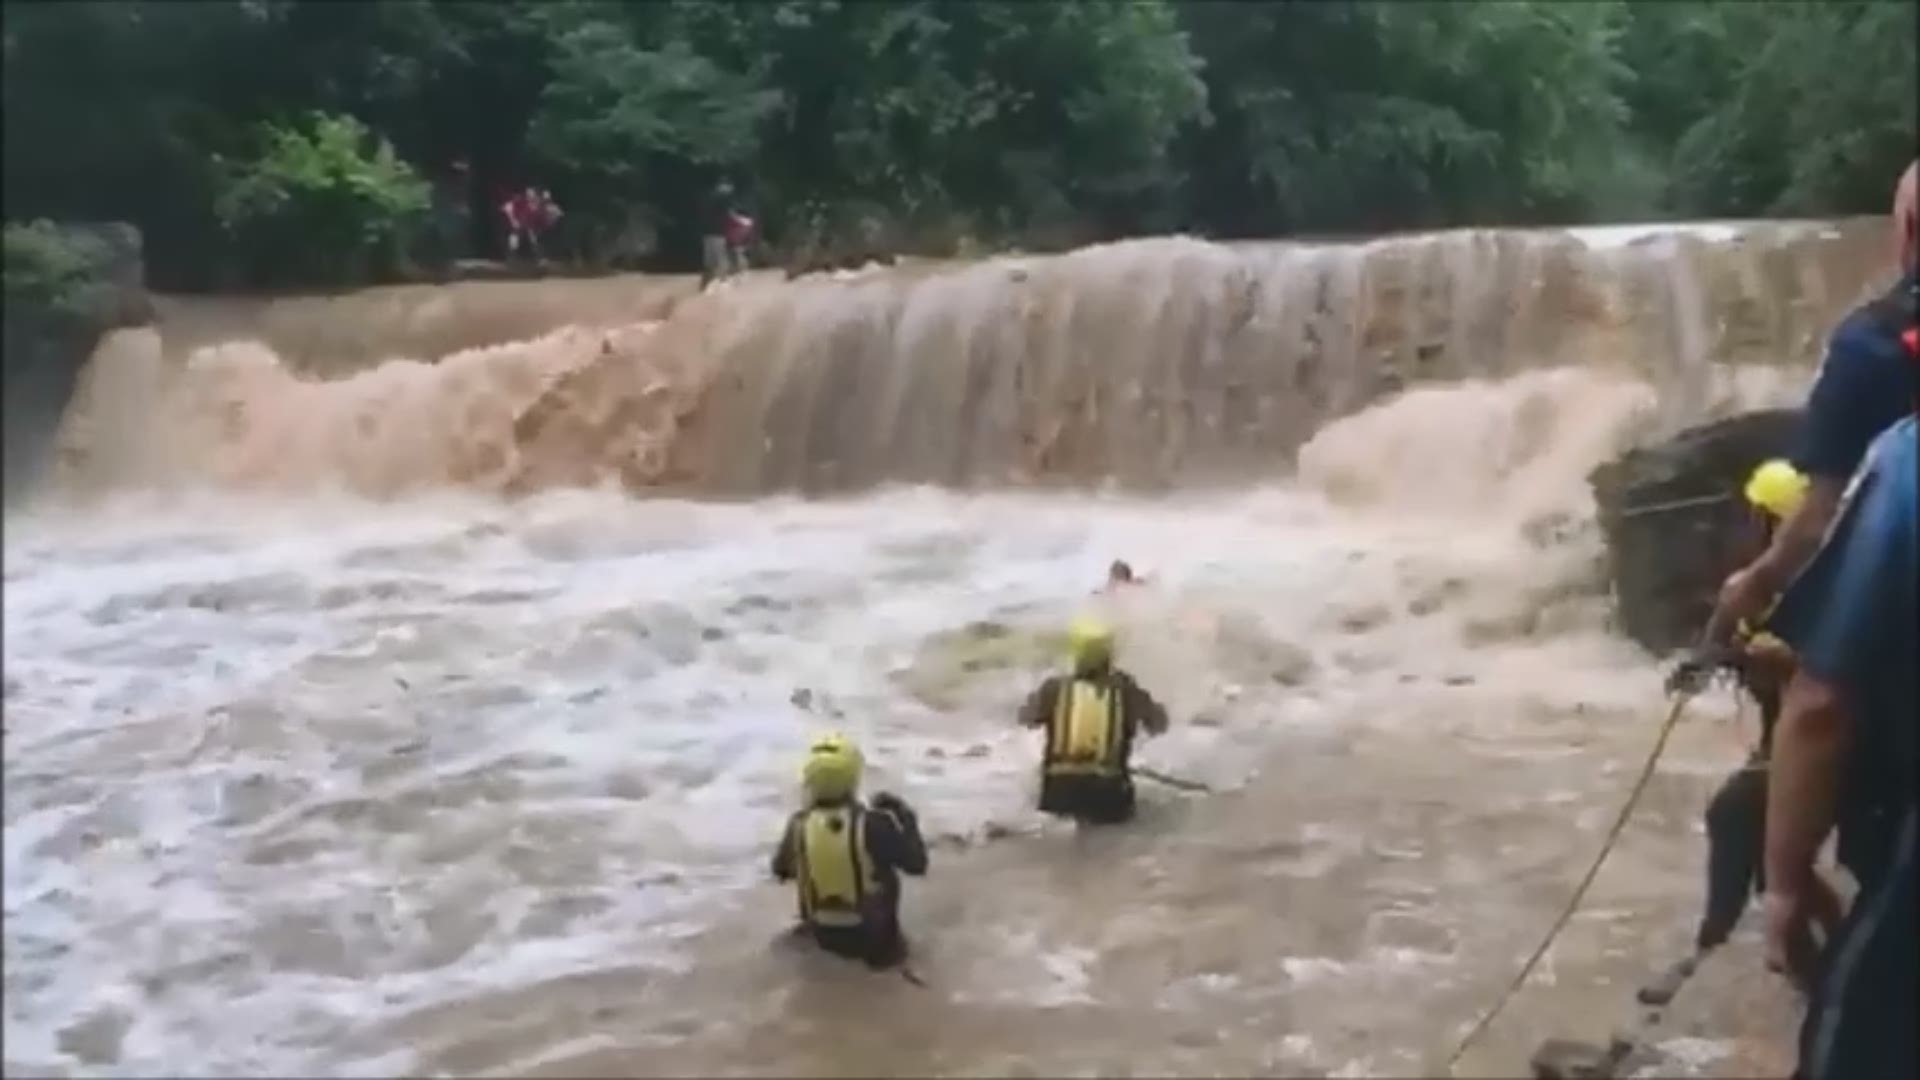 A total of 10 children and one adult, some dangerously close to falling over the falls, were rescued by several first responders in Gwinnett County